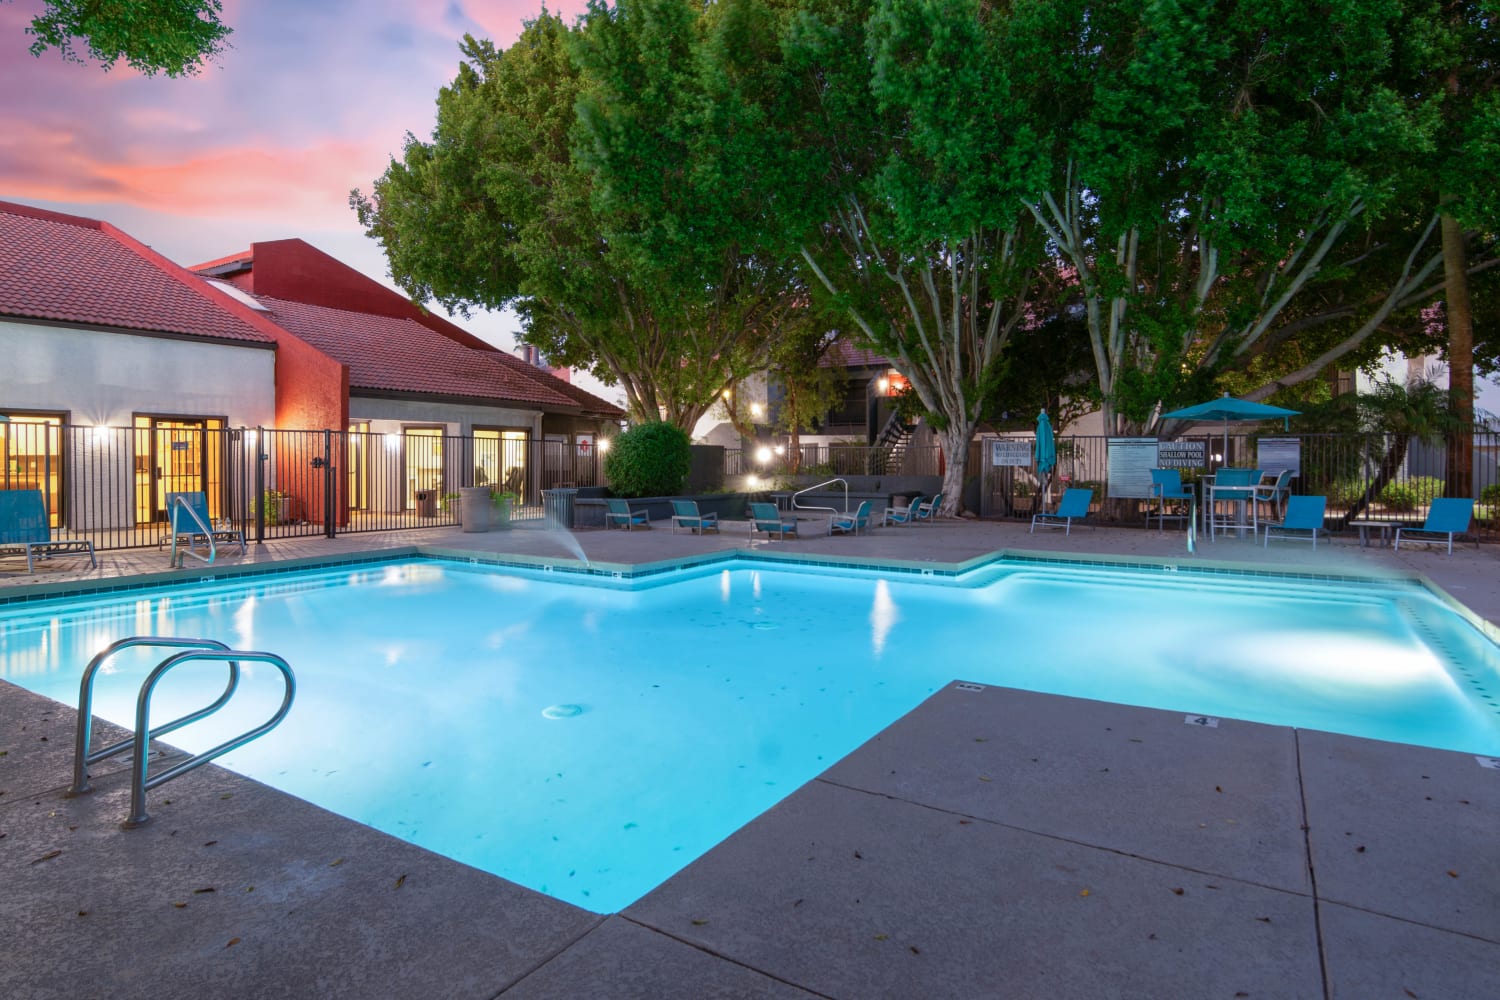 Enjoy apartments with a swimming pool at Waterford Place Apartments in Mesa, Arizona